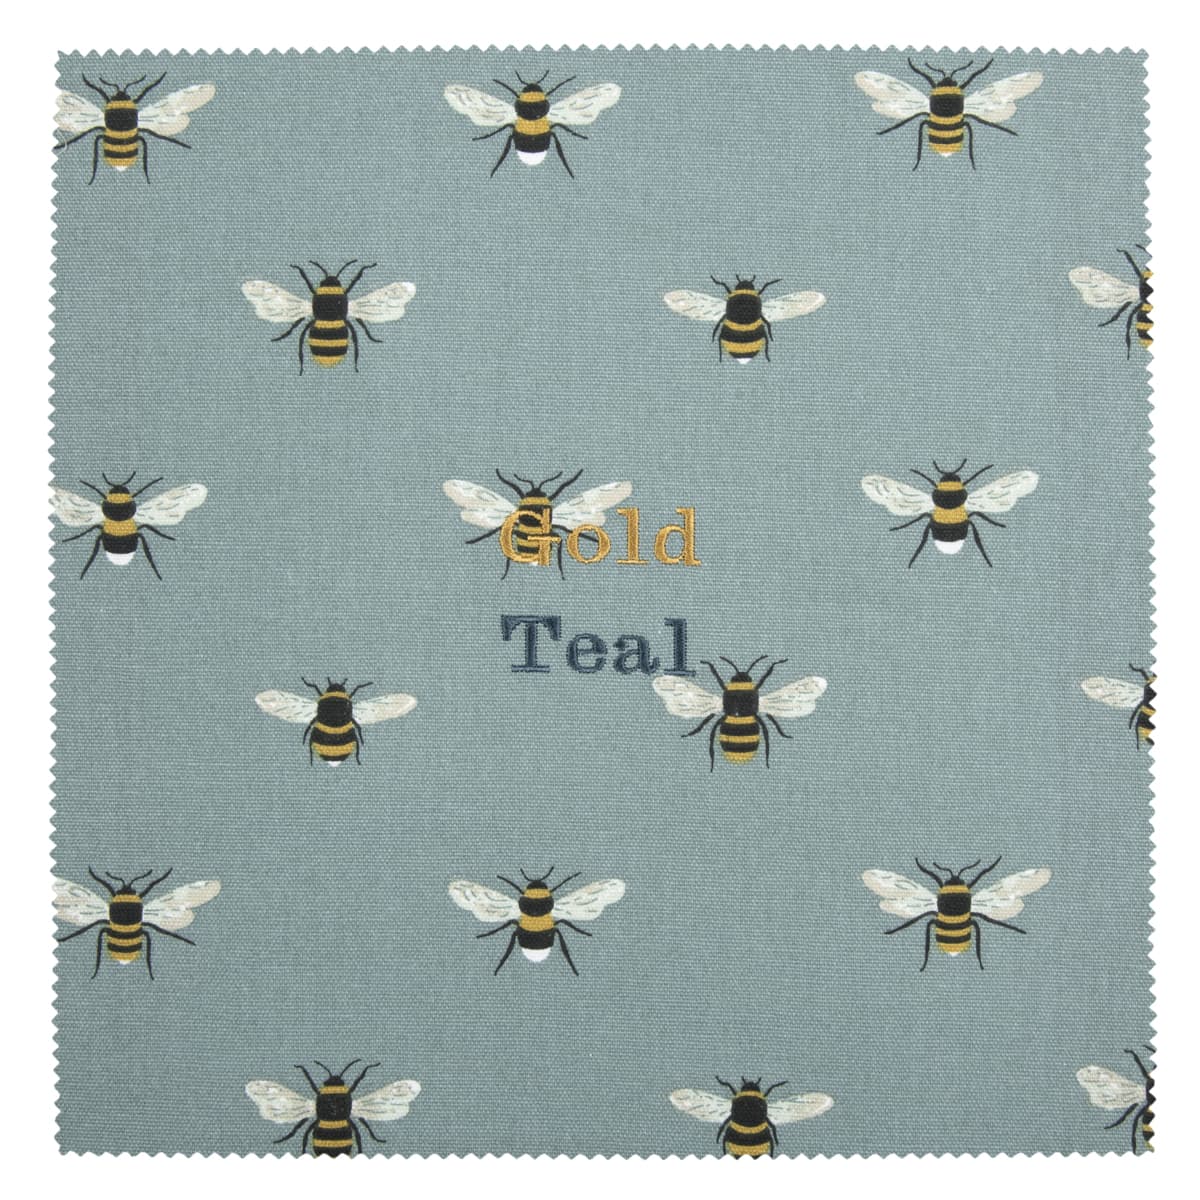 Bees Teal Adult Apron